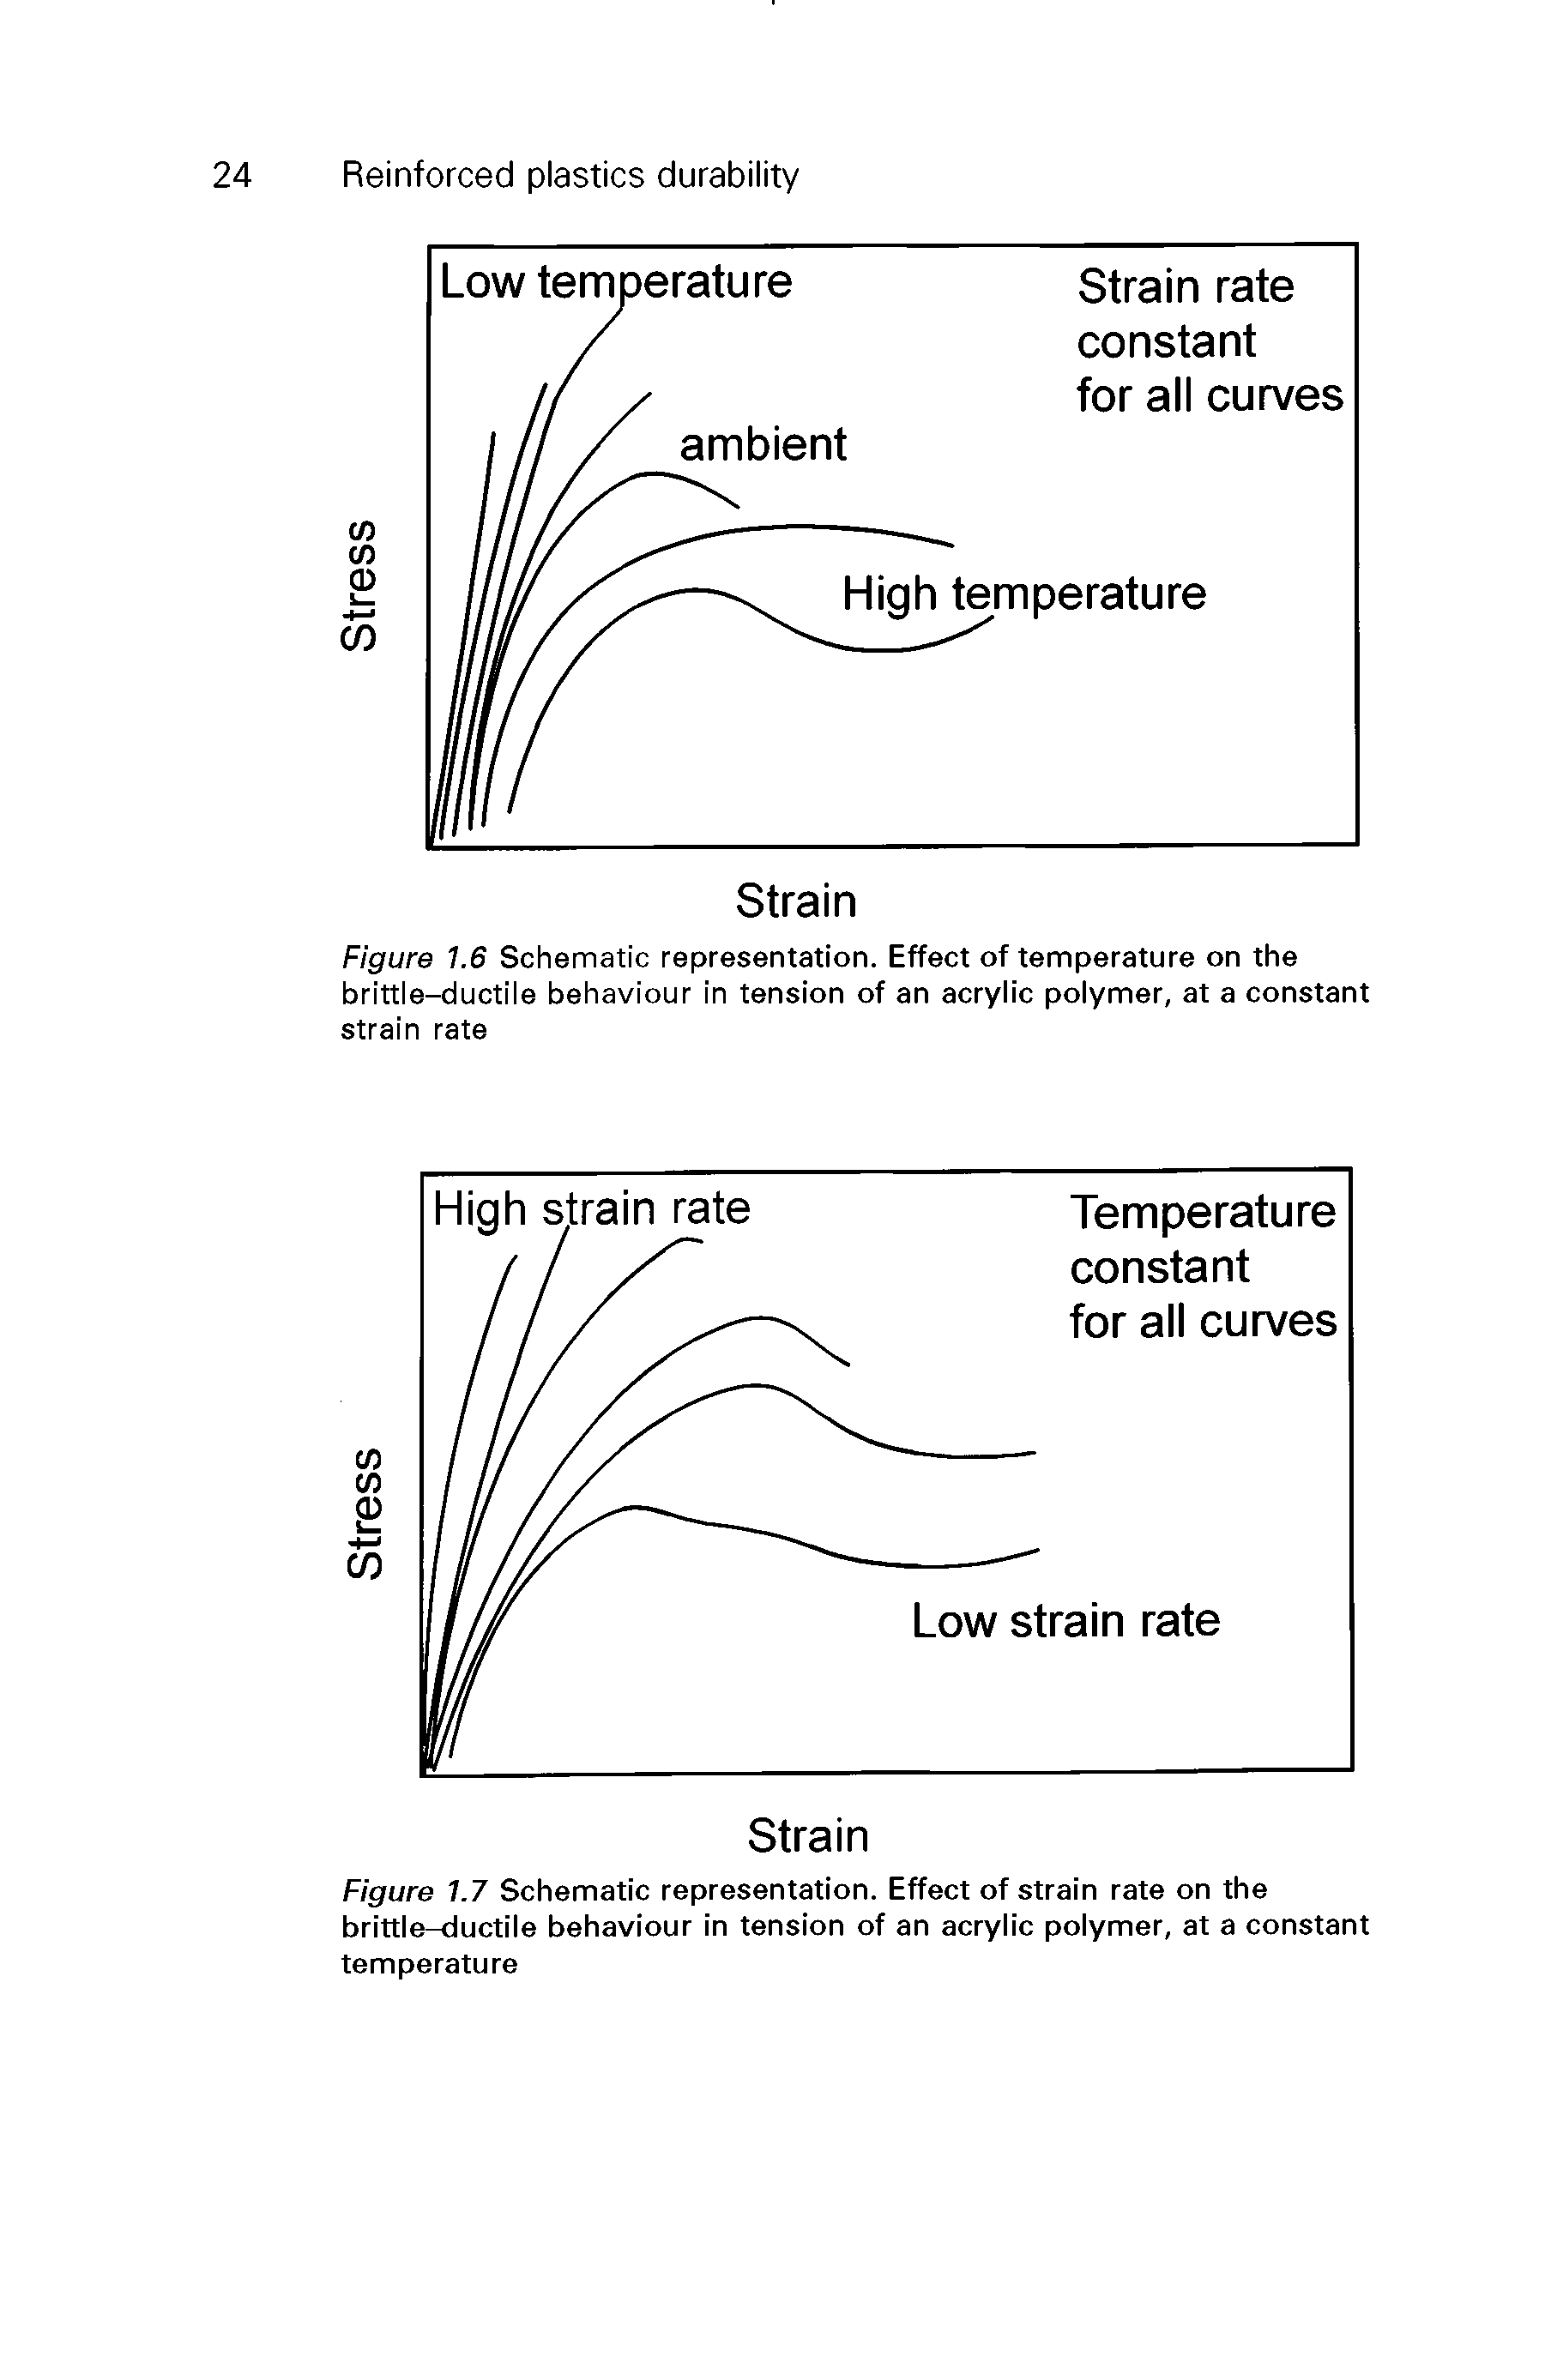 Figure 1.7 Schematic representation. Effect of strain rate on the brittle-ductile behaviour in tension of an acrylic polymer, at a constant temperature...